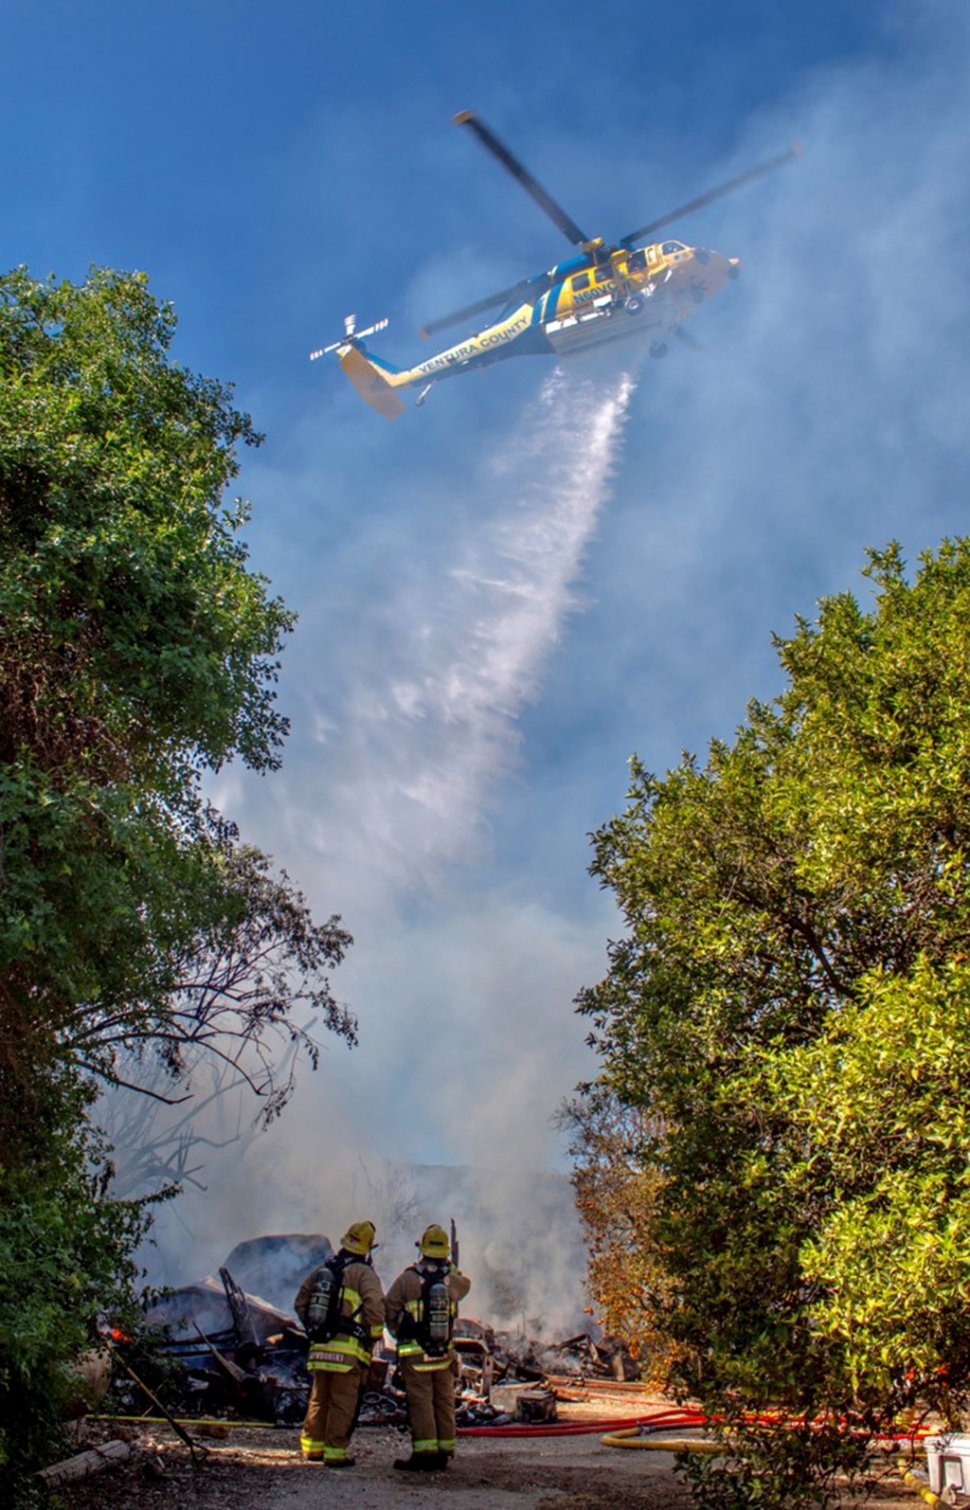 On Wednesday, March 16th, 2022, at 10:15am, the Ventura County Fire Department was dispatched to a structure fire in the 3500 block of Guiberson Road. Arriving fire crews reported a travel trailer fully engulfed, with flames spreading to nearby brush. Firefighters made a brush fire response with VCFD/VCSO Copter making water drops. The fire was reported at least a tenth of an acre; no injuries. Photo credit Angel Esquivel-AE News.